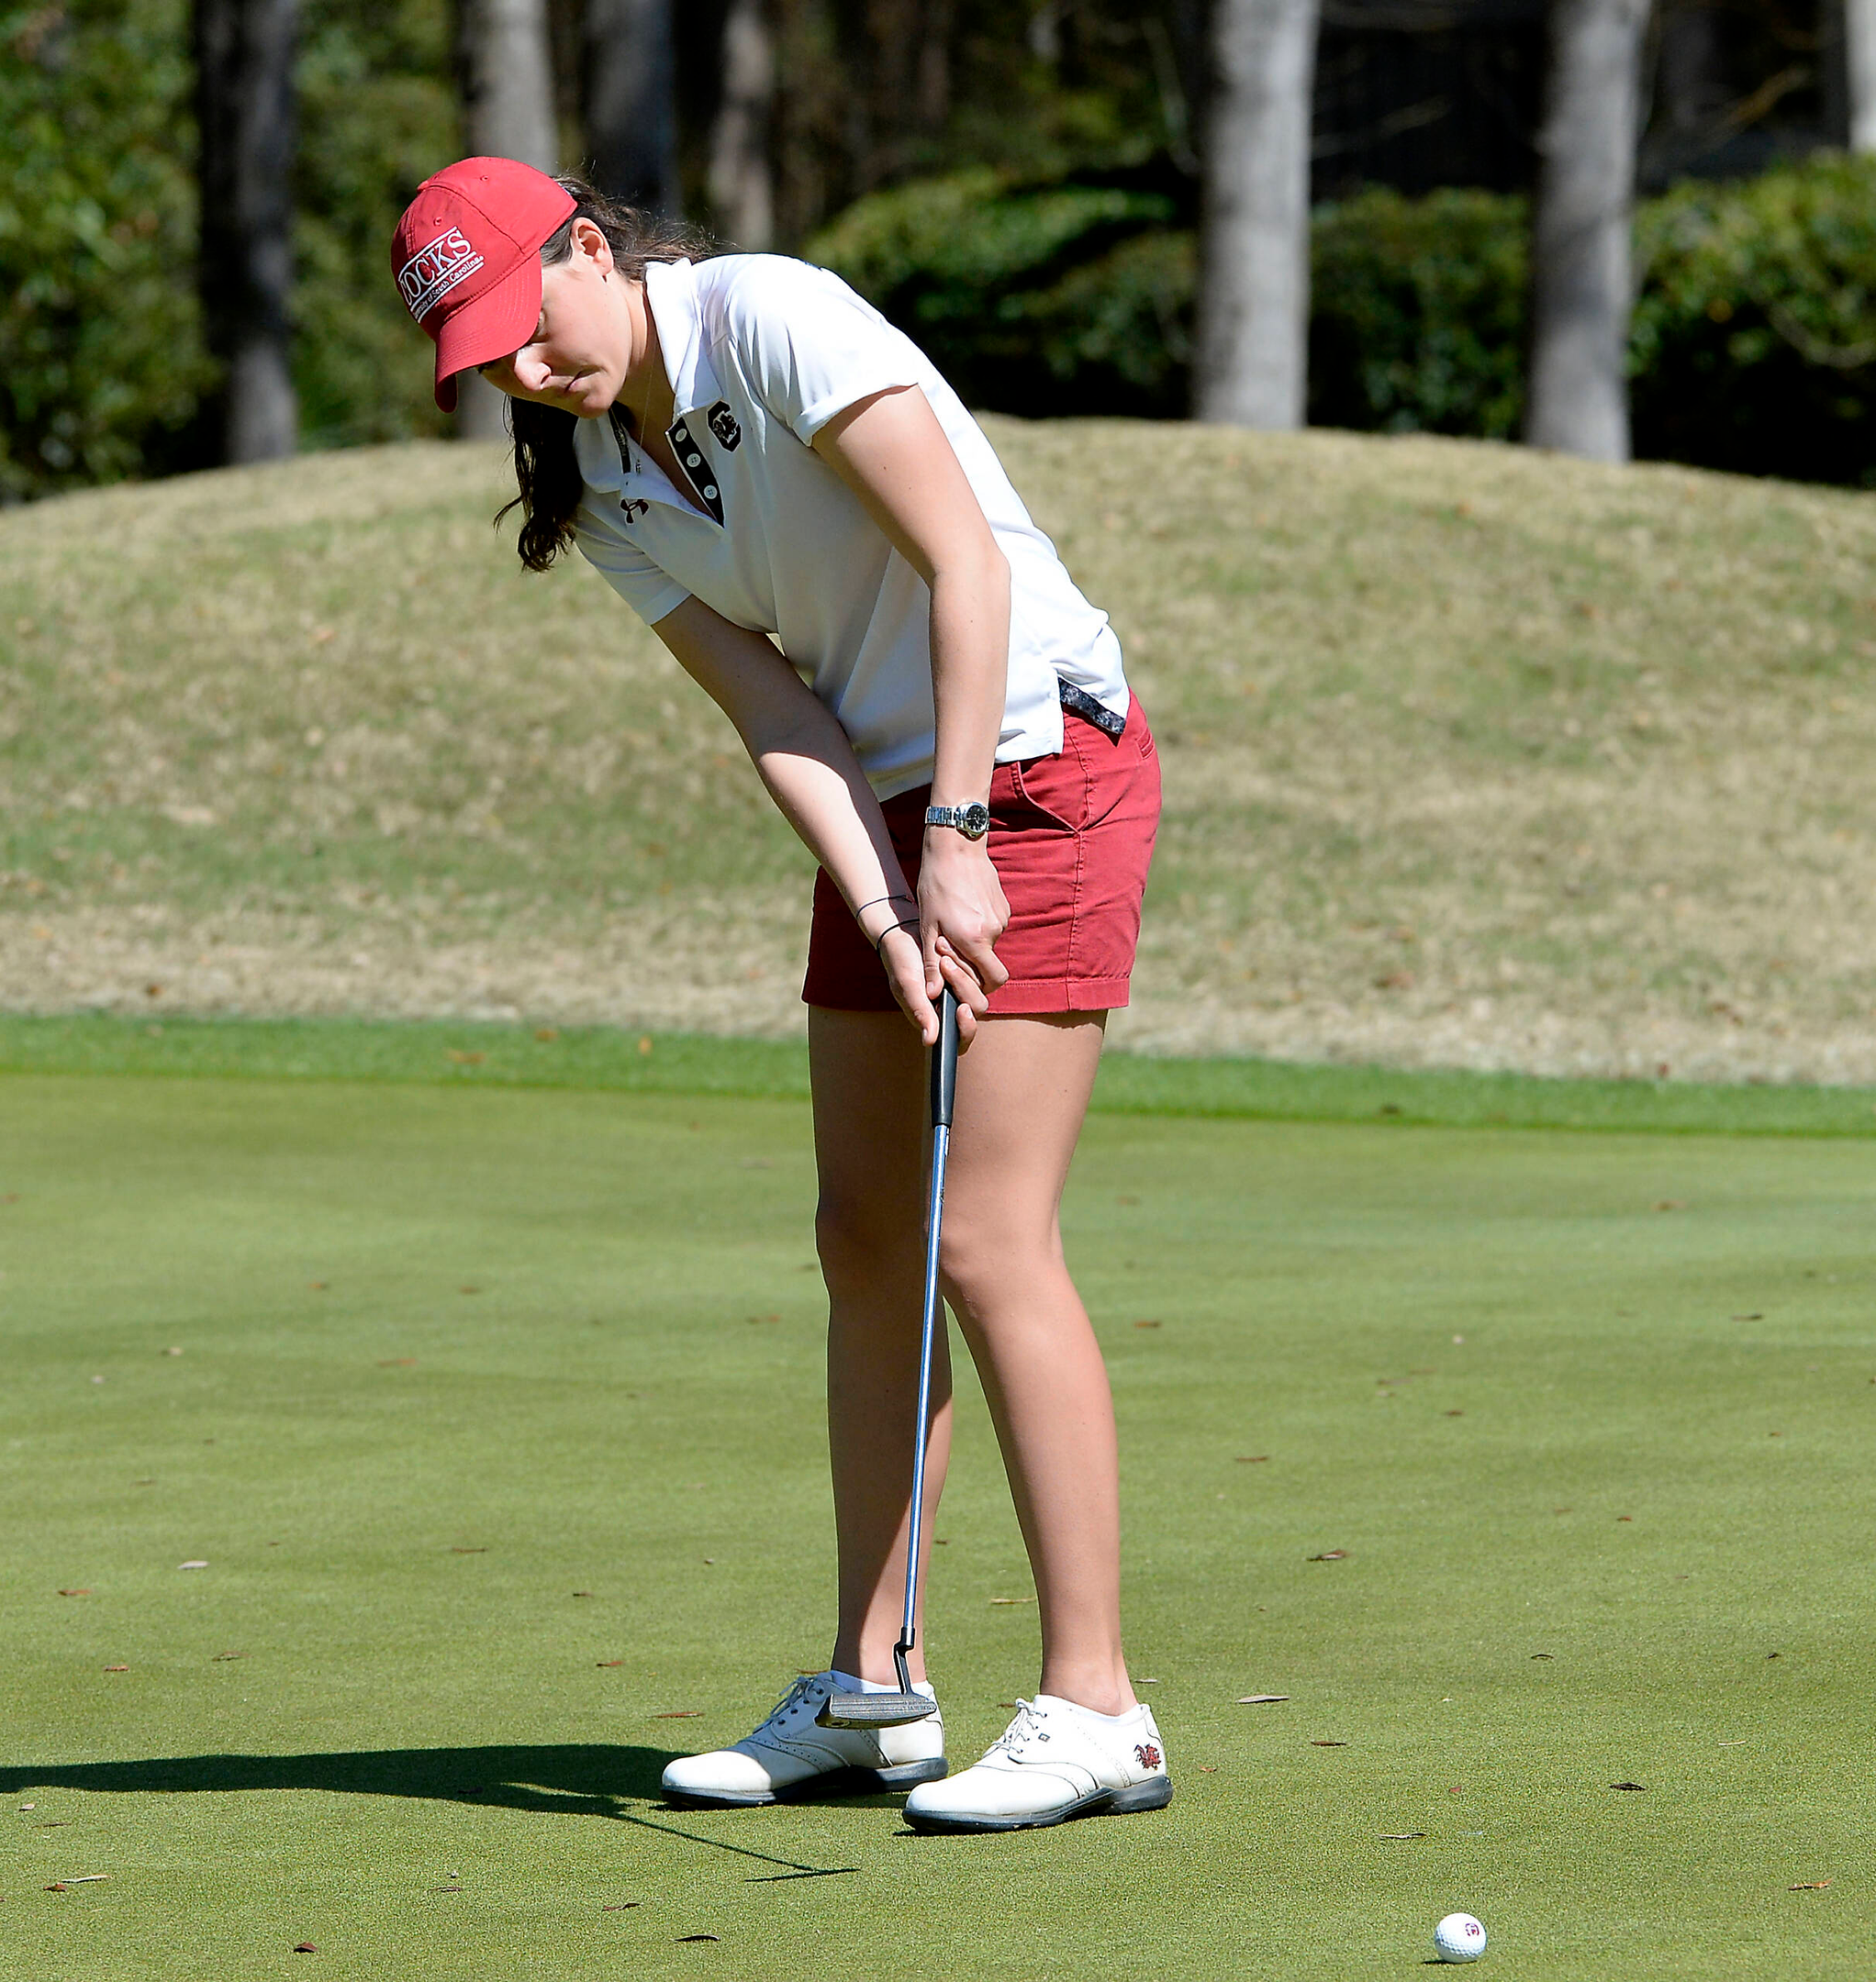 Gamecocks Finish in Second Place At Bryan National Collegiate